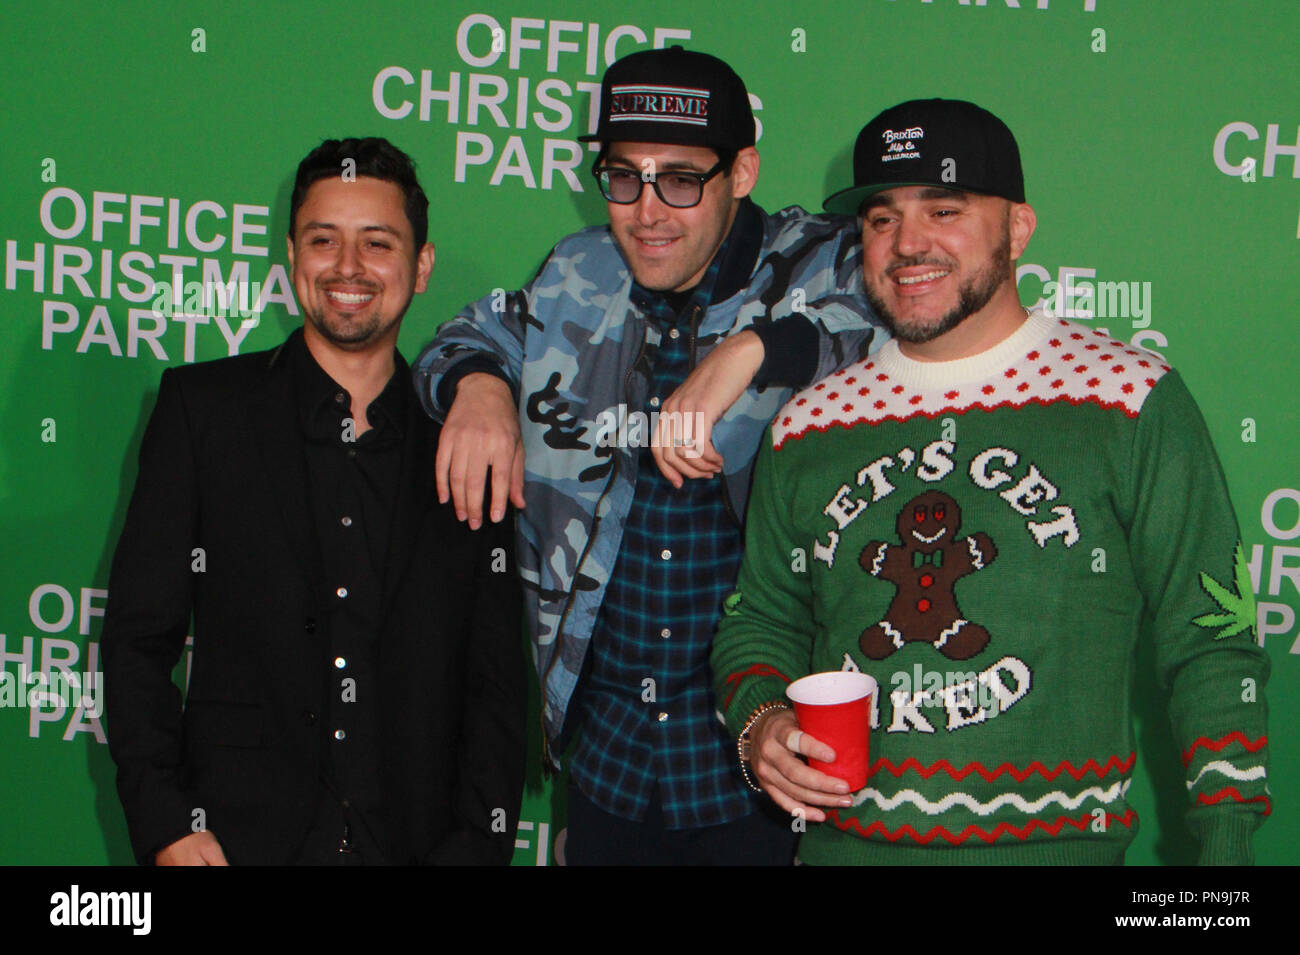 Louie Rubio, Lex Larson, and DJ Felli Fel, The Americanos  12/07/2016 The Los Angeles Premiere of "Office Christmas Party" held at  the Regency Village Theater in Los Angeles, CA Photo by Izumi Hasegawa /  HNW / PictureLux Stock Photo